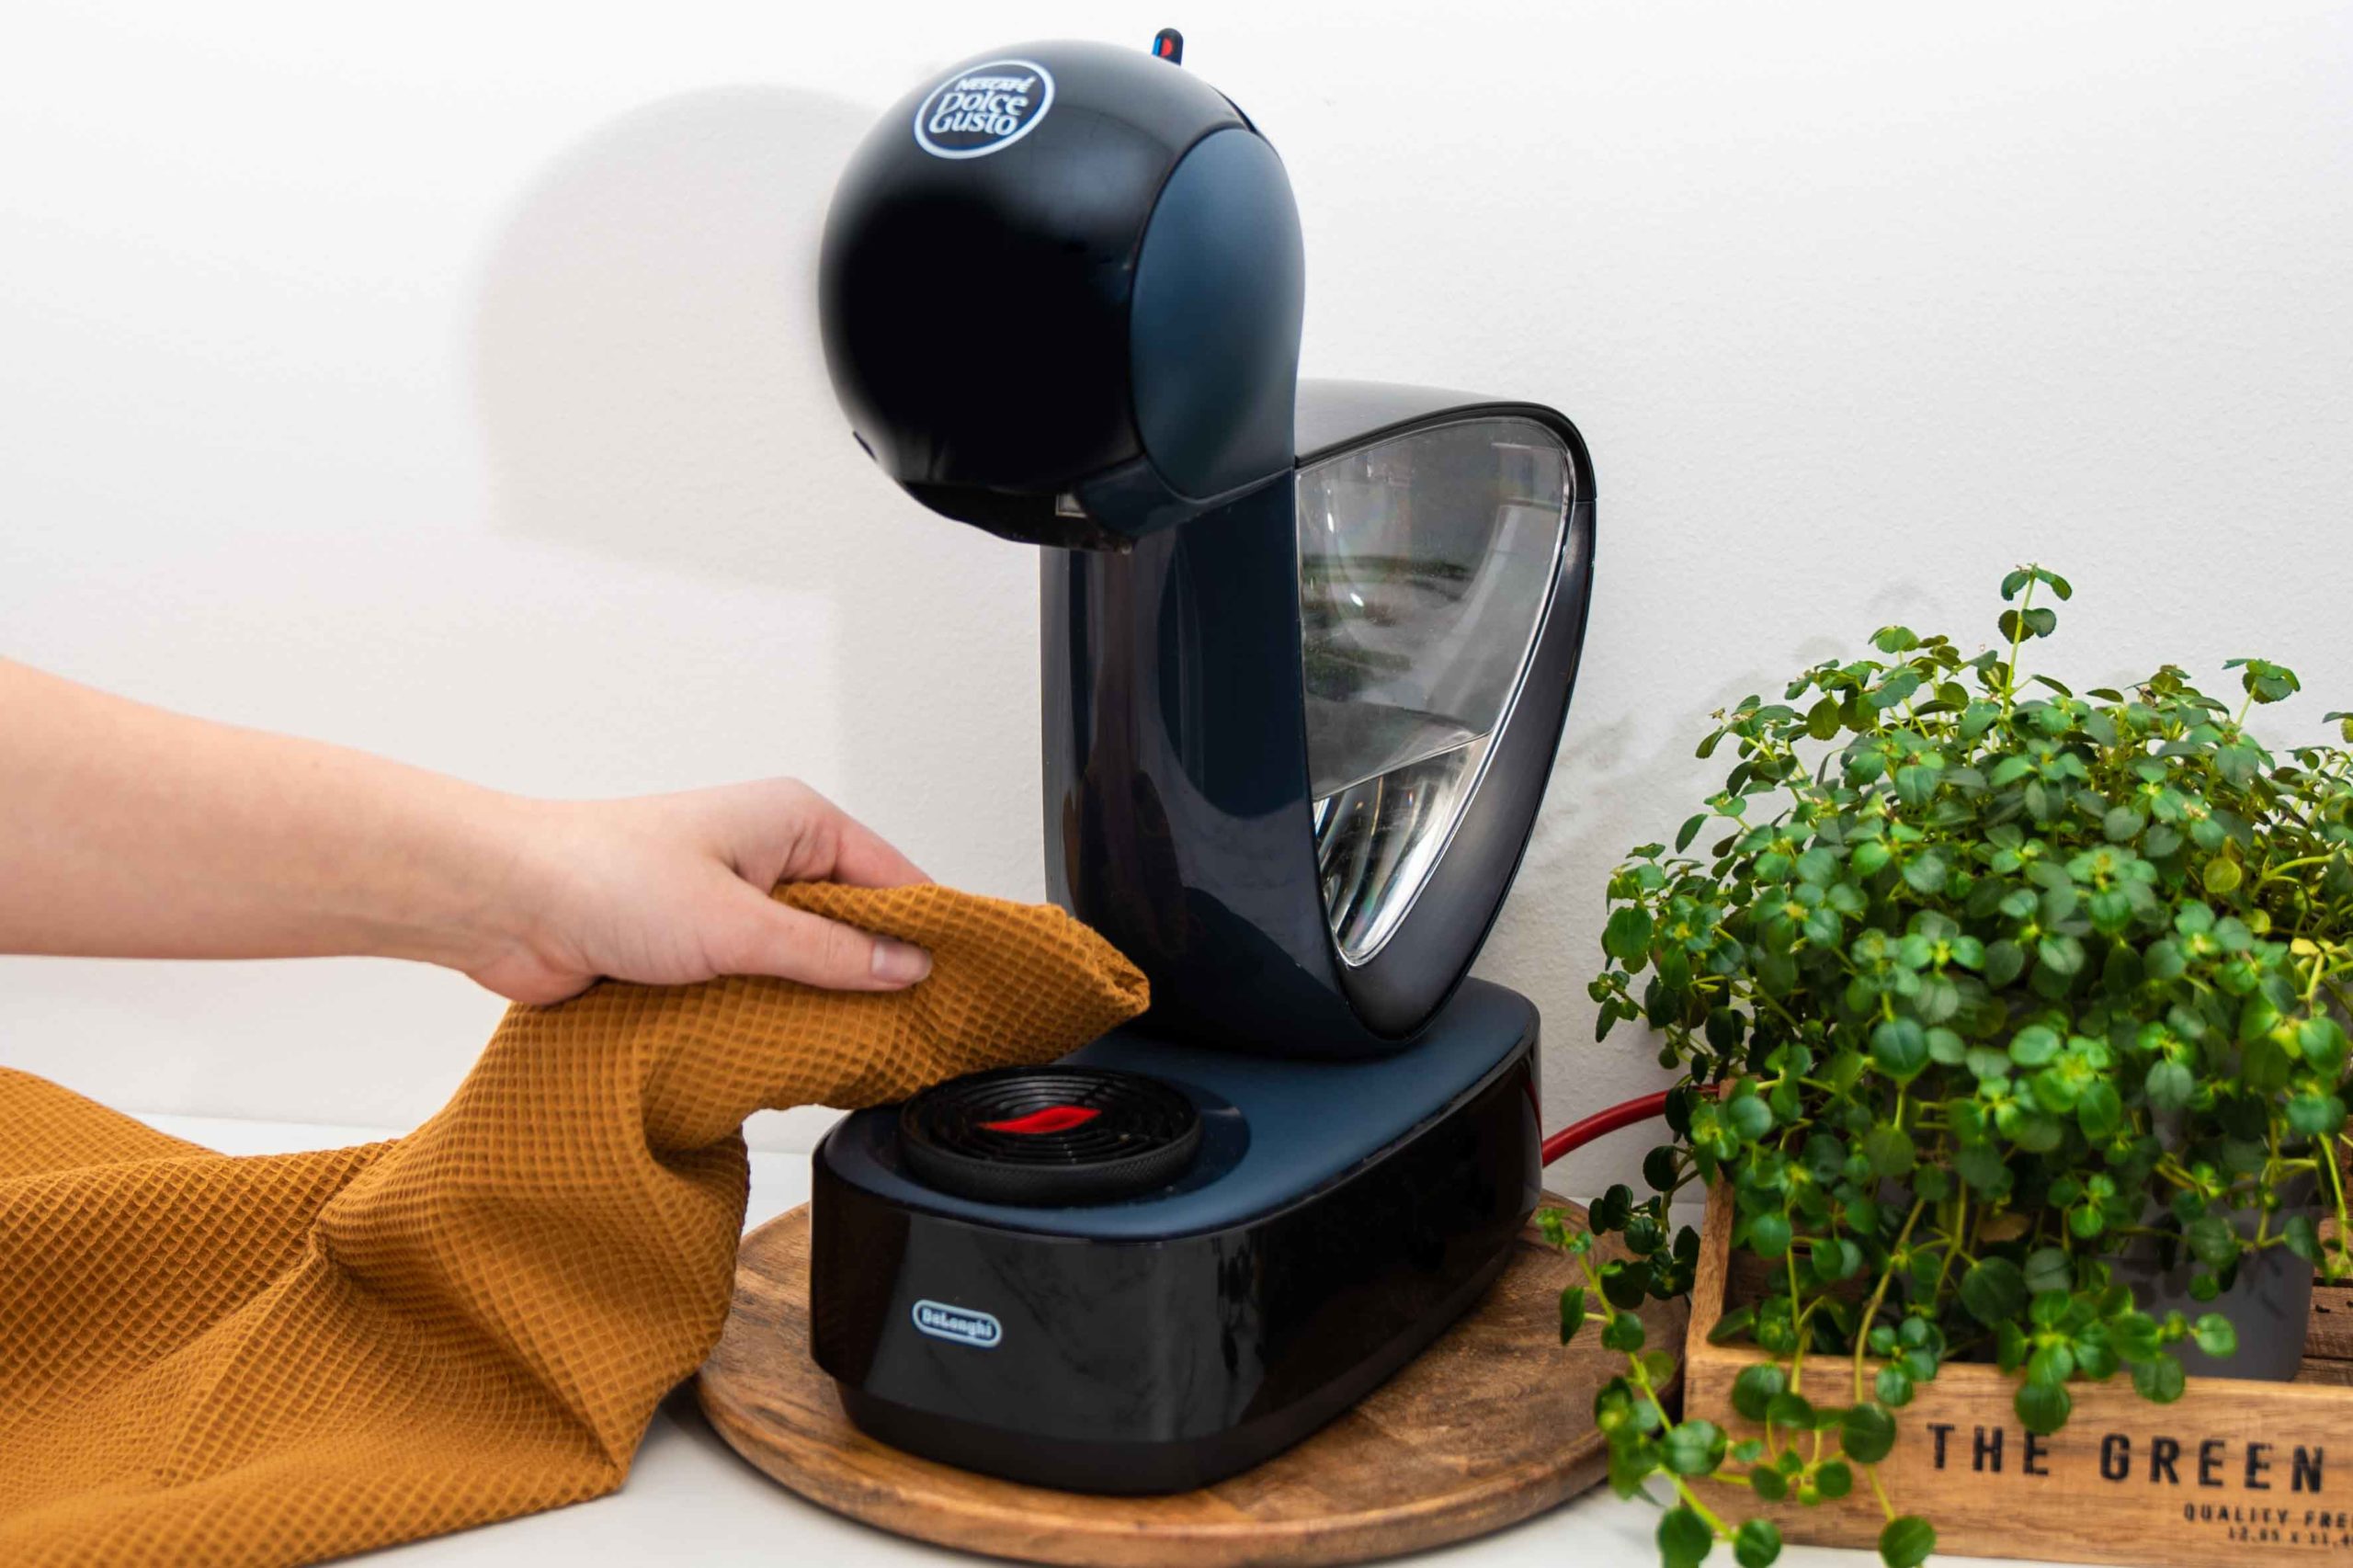 How to Clean a Nescafe Dolce Gusto Coffee Machine? - Coffee Friend